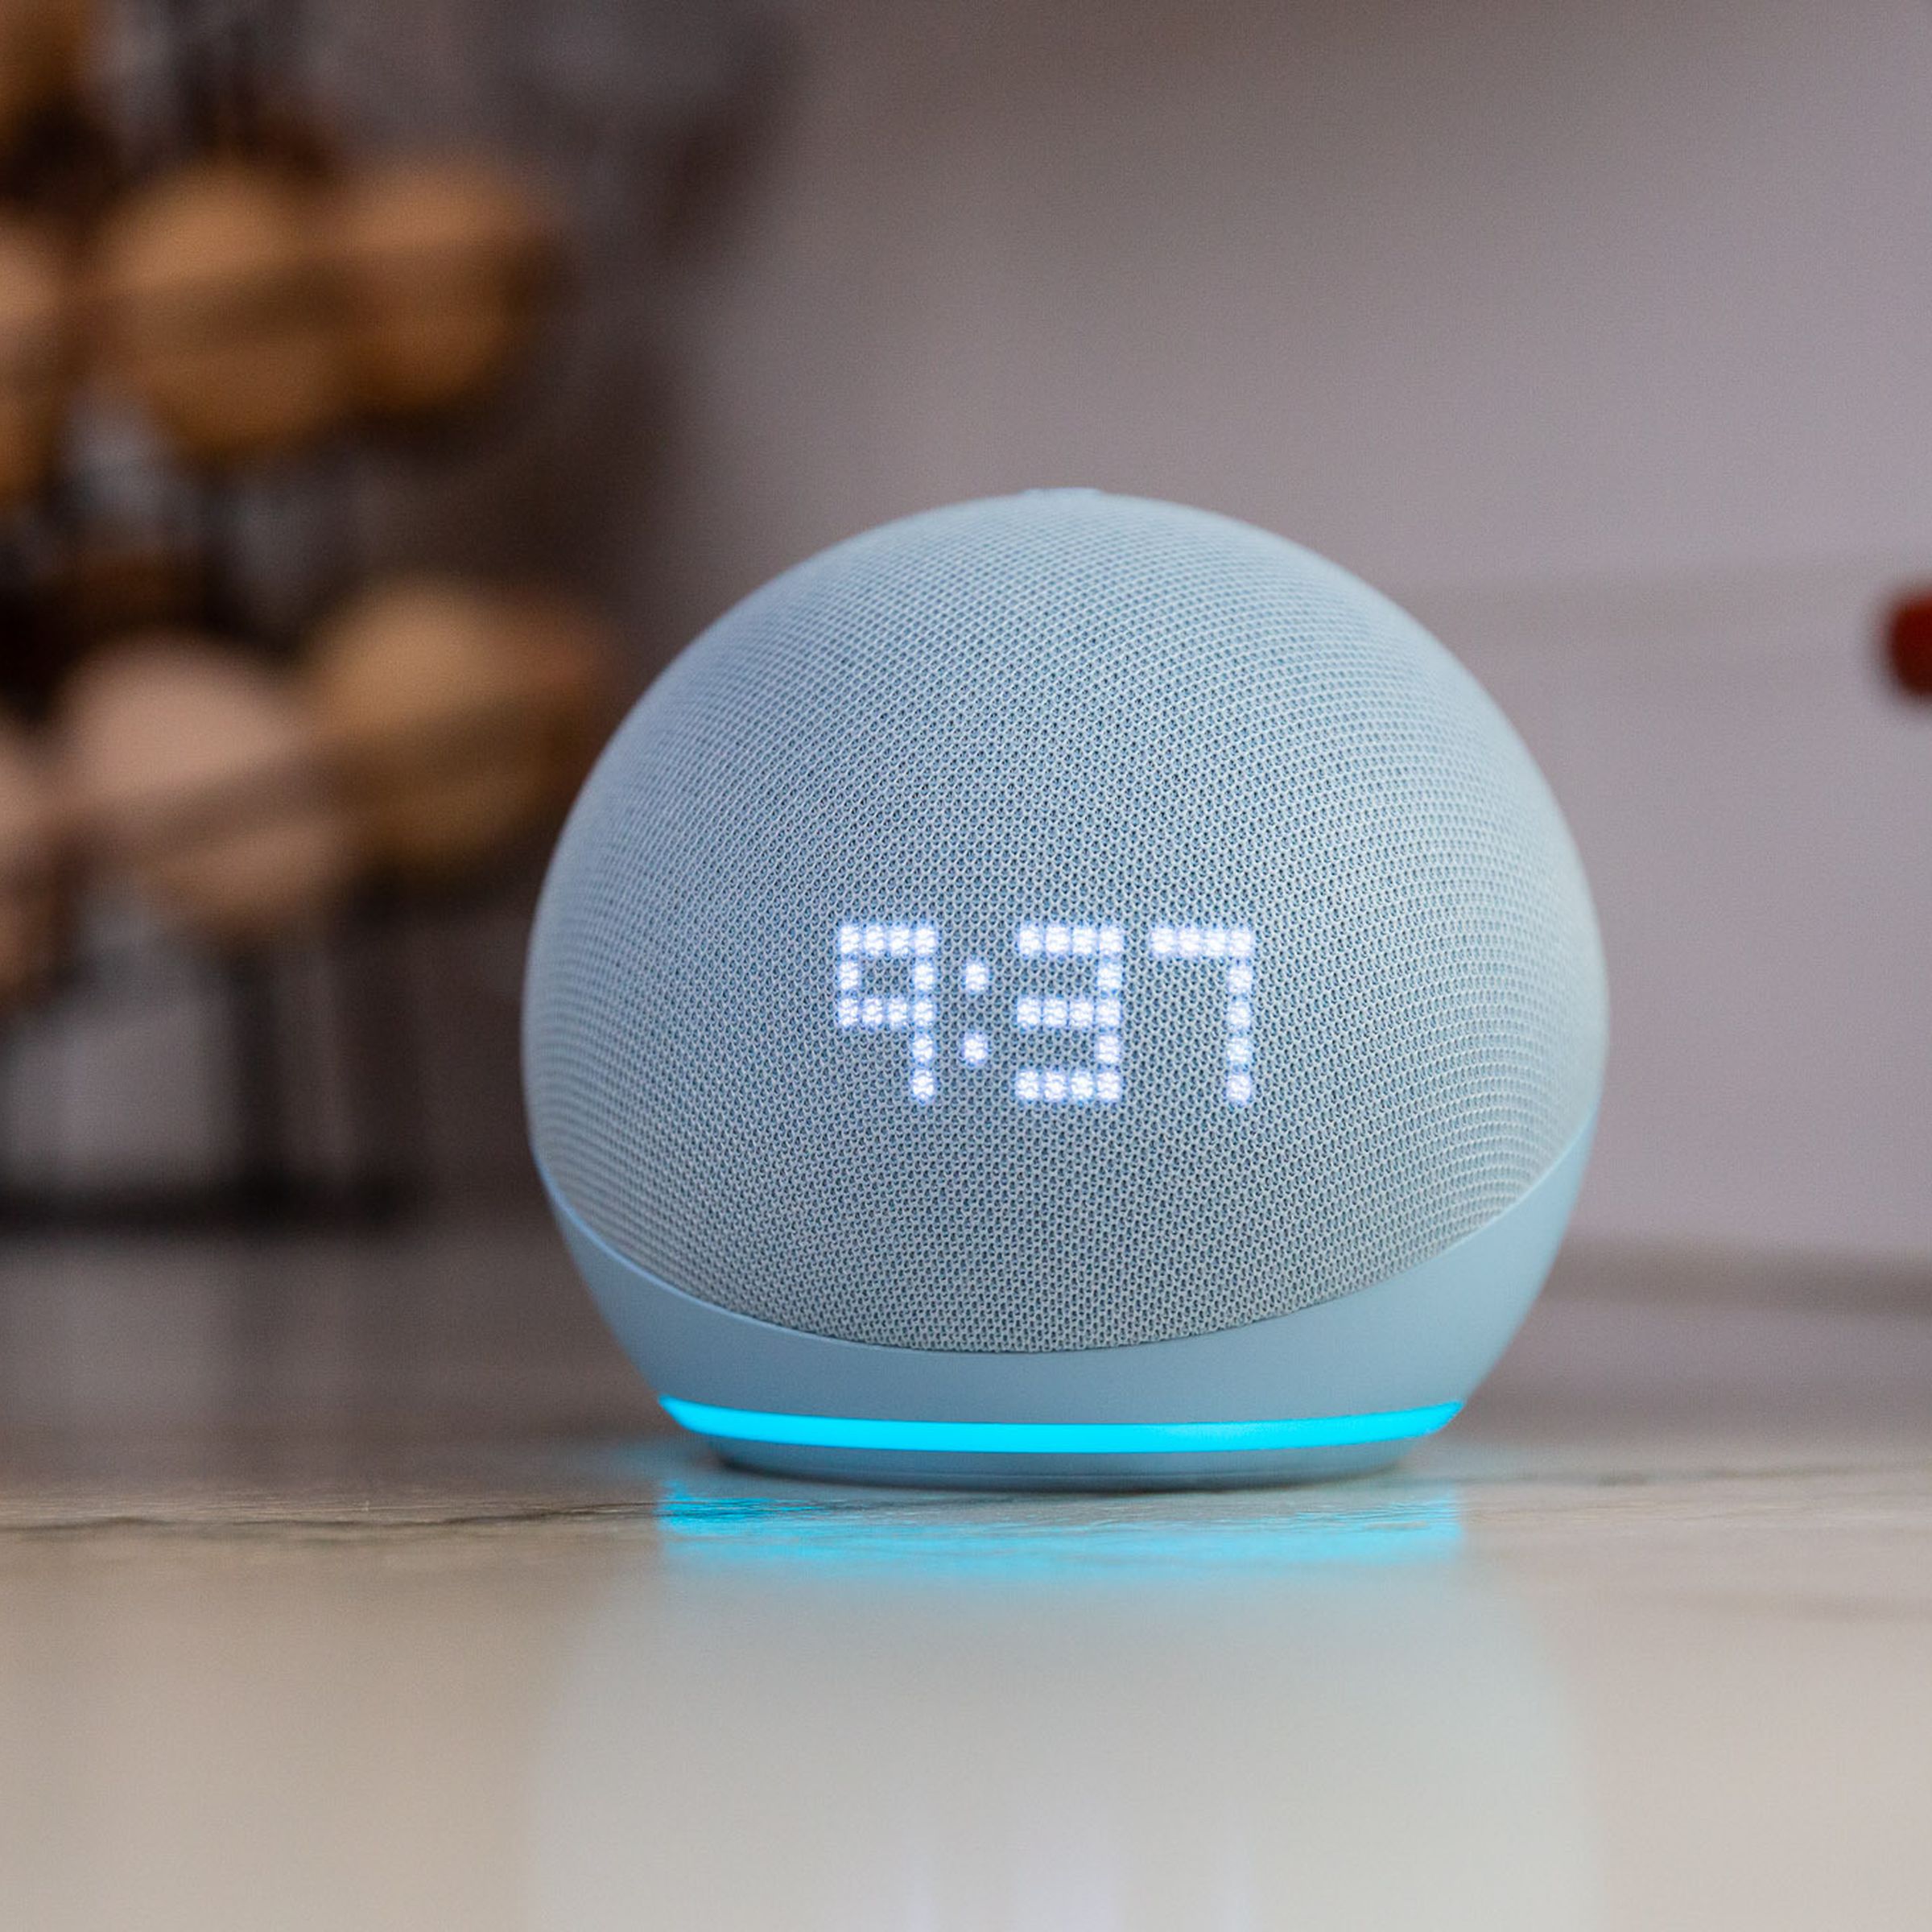 Amazon’s fifth-gen Echo Dot smart speaker showing the time on its display while sitting on a kitchen counter.